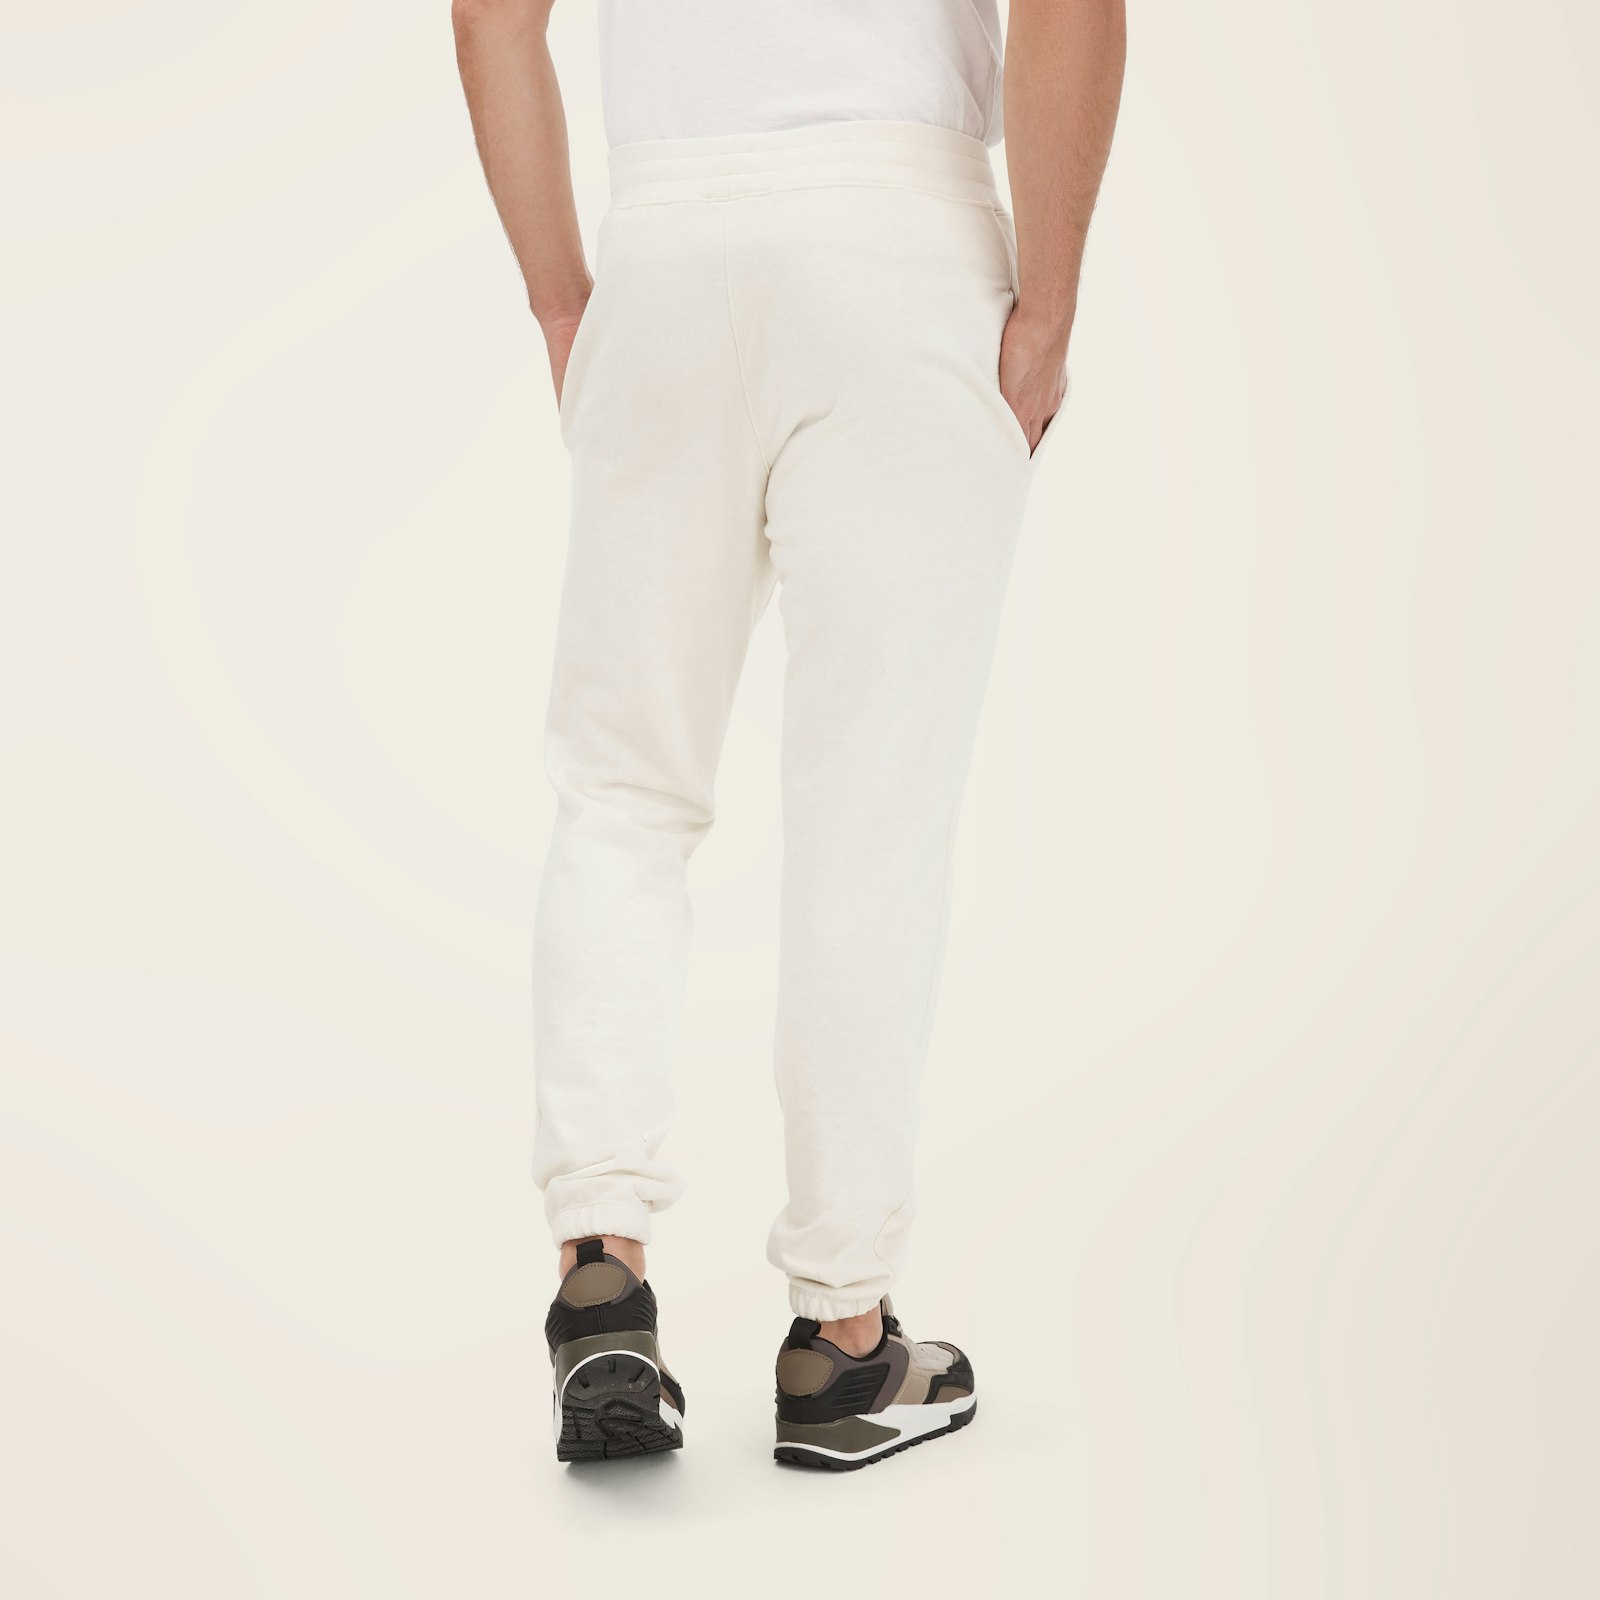 UnisexRecycledTerrySweatpants_OffWhite_Mens_OnFigure_1x1_0795.jpg